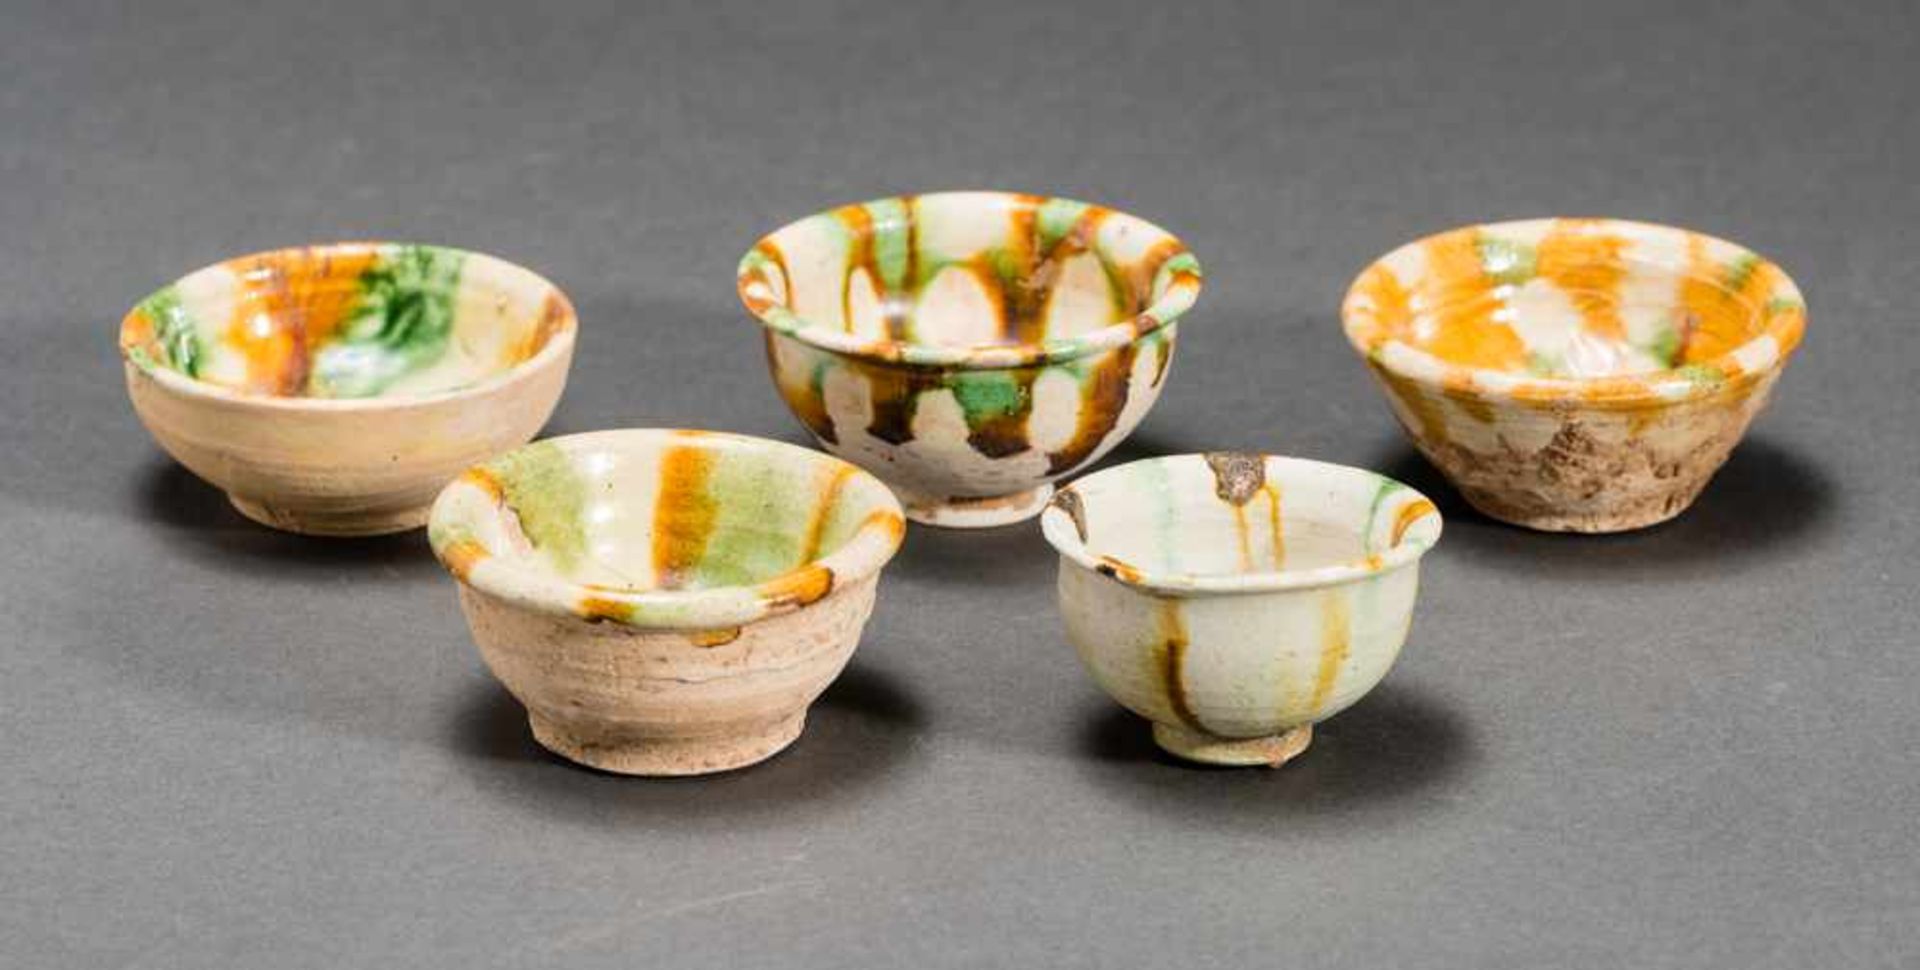 FIVE BOWLS Glazed ceramic. China, Tang dynasty (618 - 907)五隻杯子Small, regularly formed bowls with